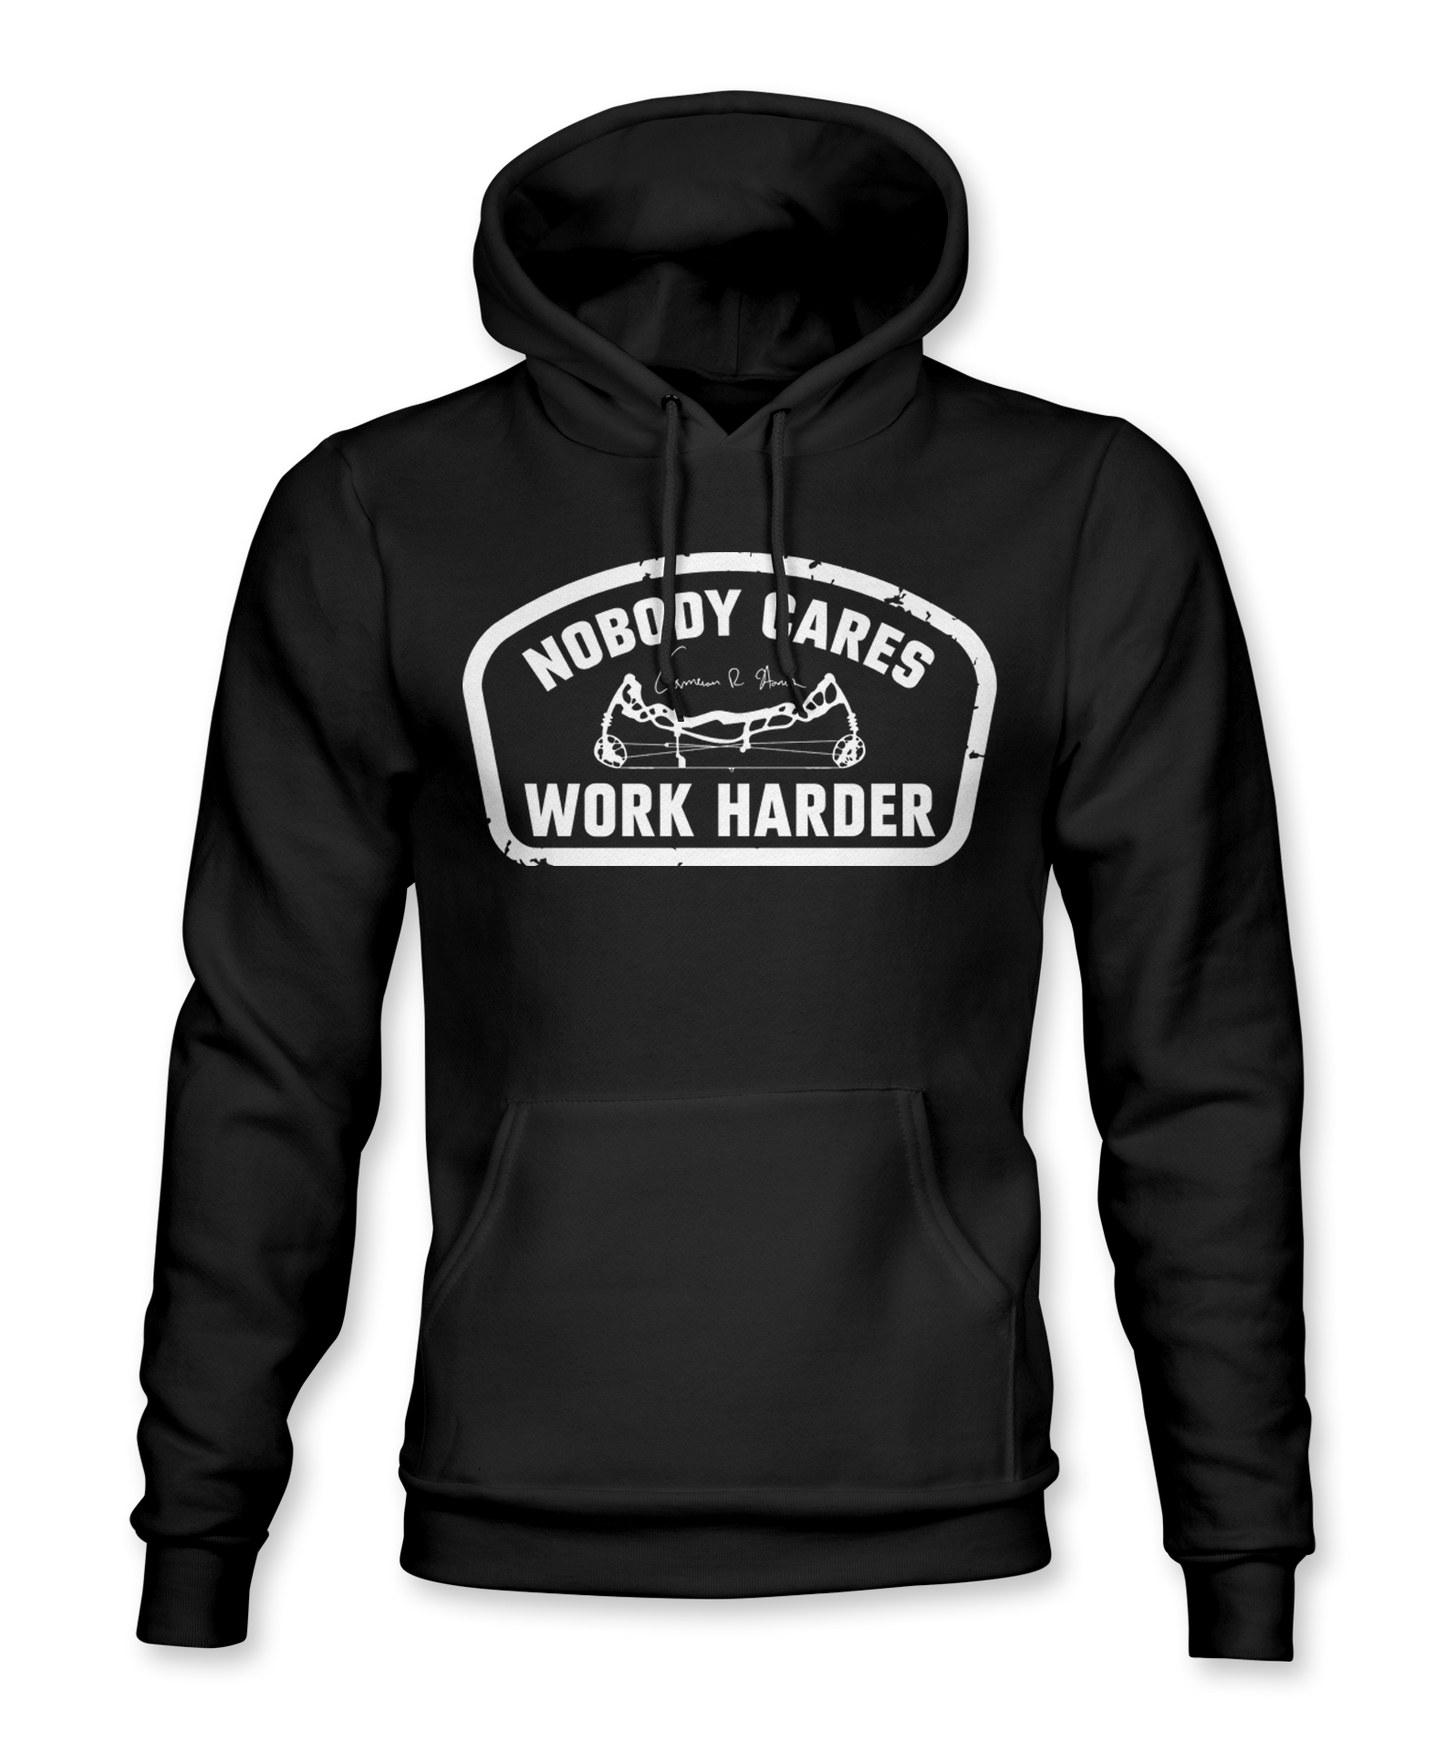 Nobody Cares Work Harder Patch Hoodie